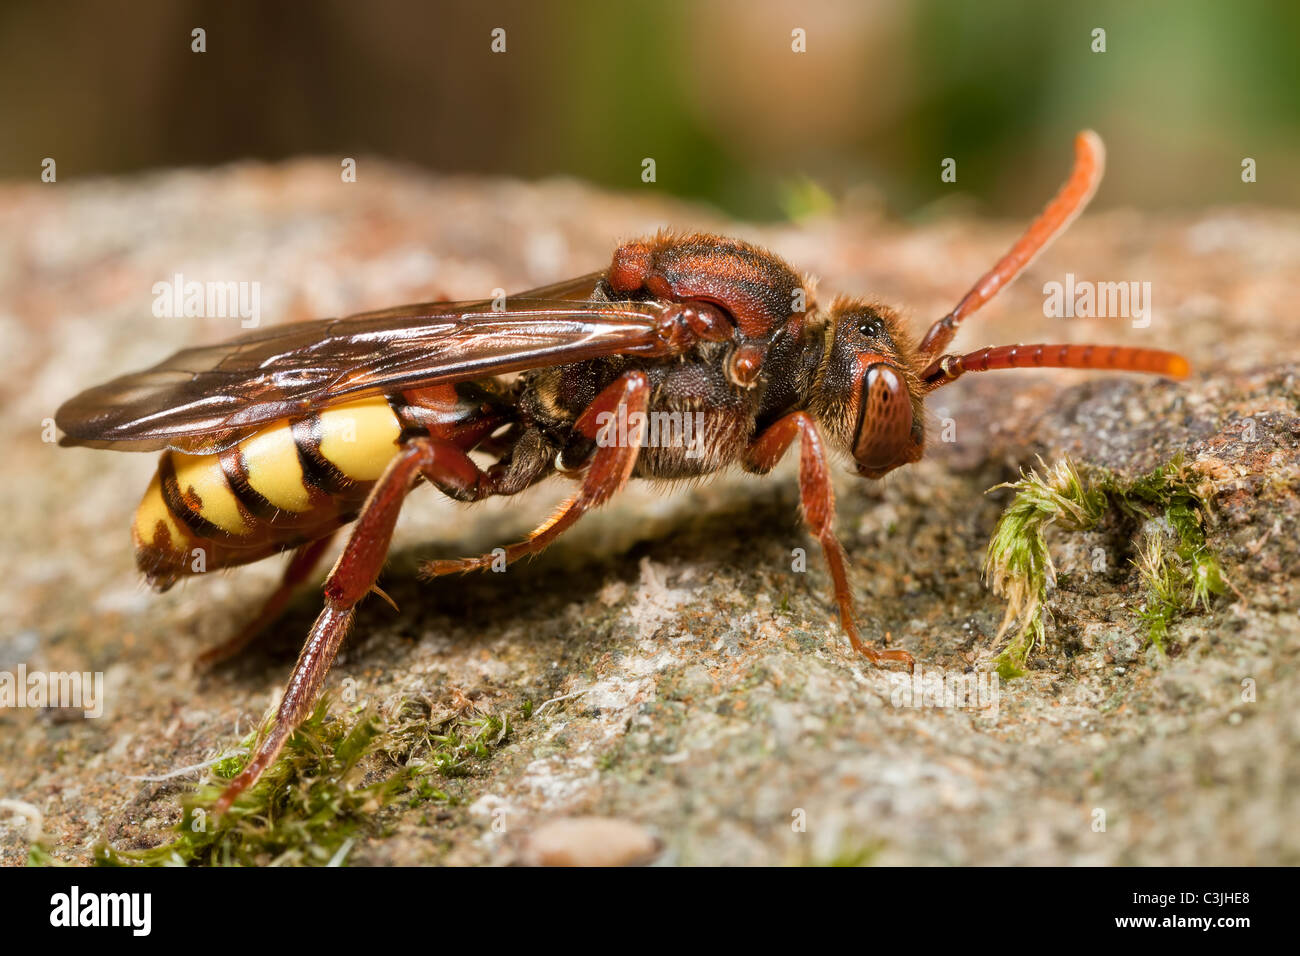 A cuckoo bee, Genus Nomada, resting on a stone surface. Stock Photo